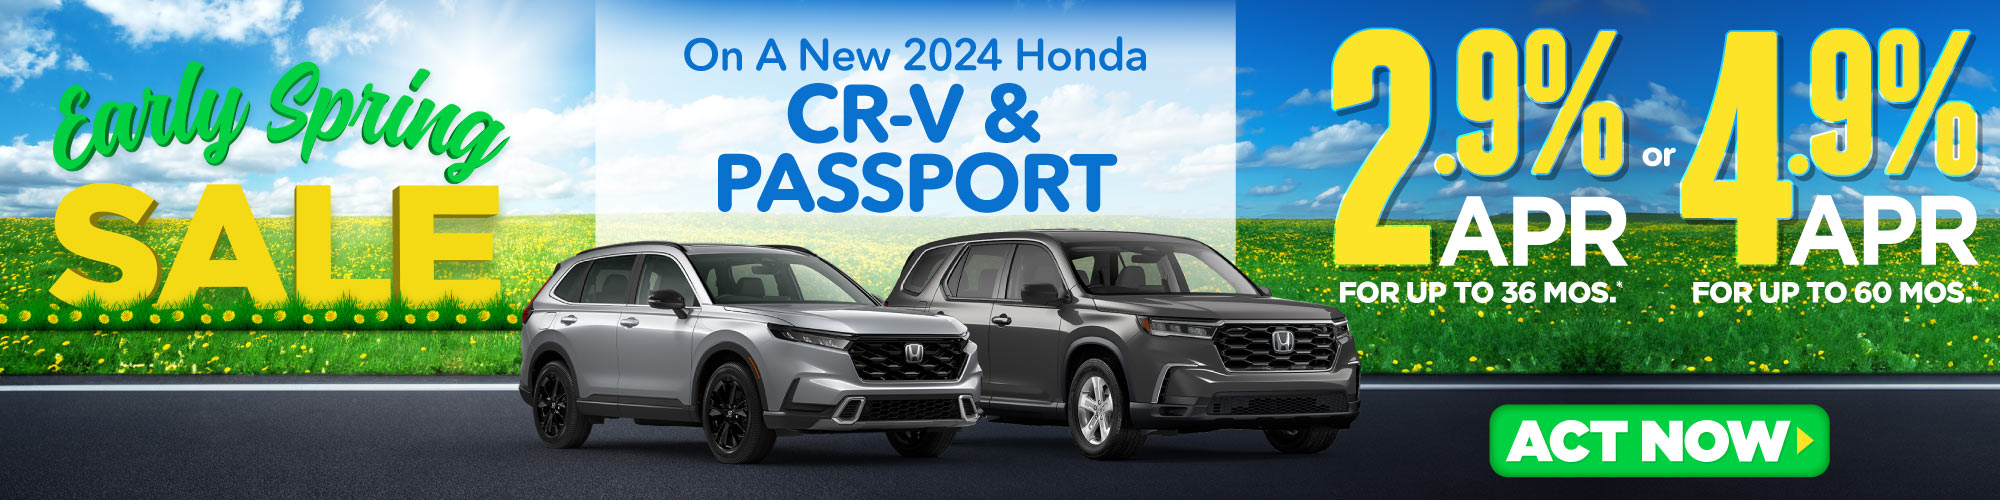 New 2022 Honda Passport or CR-V | 1.9% APR for up to 24-48 months or 2.9% APR for up to 49-60 months or 3.9% APR for up to 61-72 months | Act Now